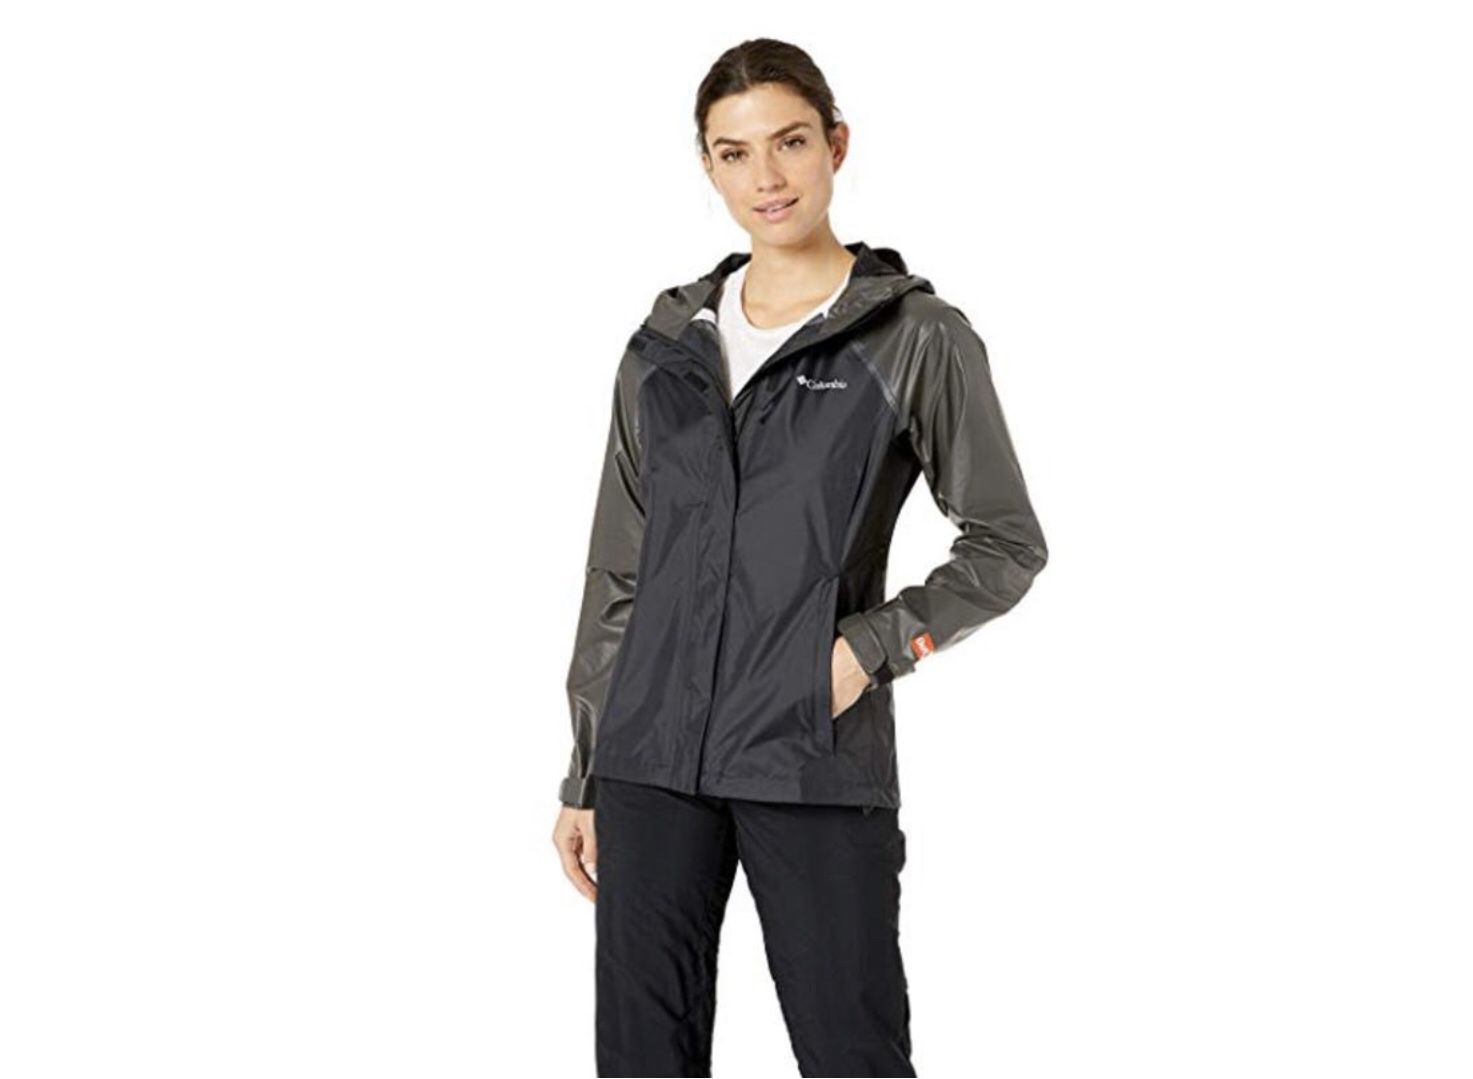 Columbia Women's Outdry Hybrid Jacket, Black, X-Small. Outdry extreme waterproof/breathable fully seam sealed, Omni-Tech waterproof/breathable fully